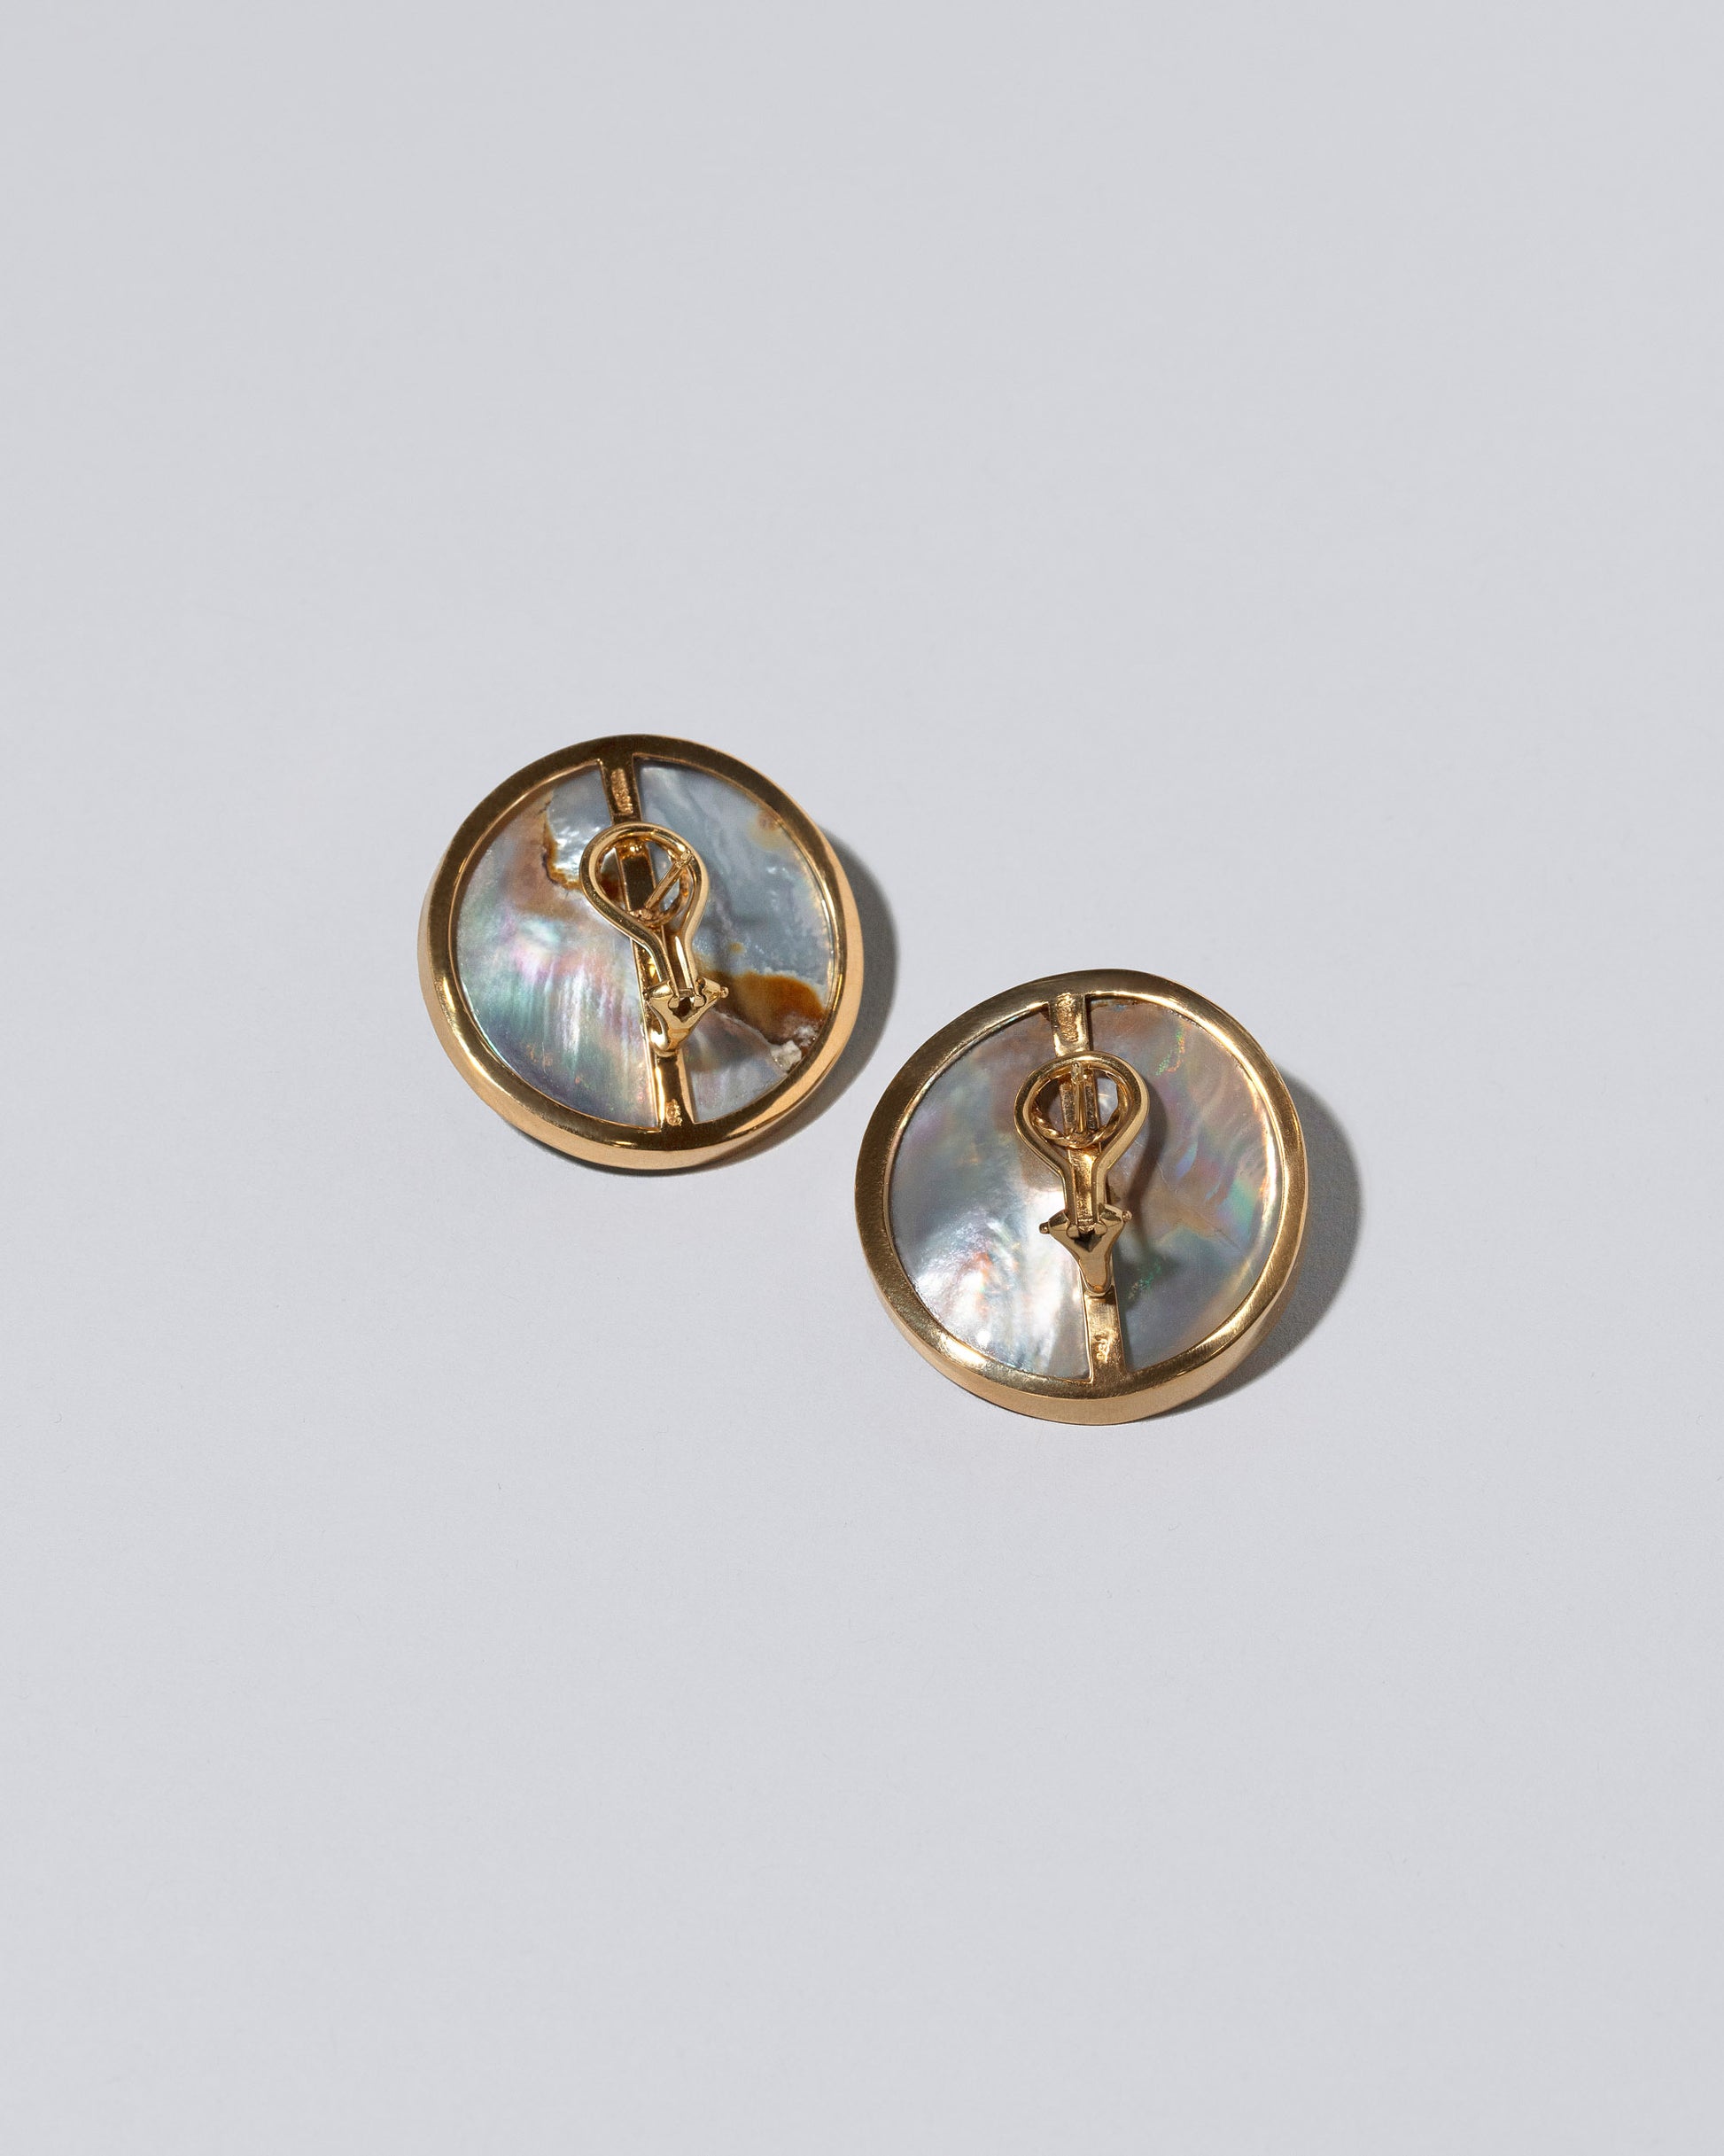 View from the back of the Seeing the Unseen Earrings on light color background.